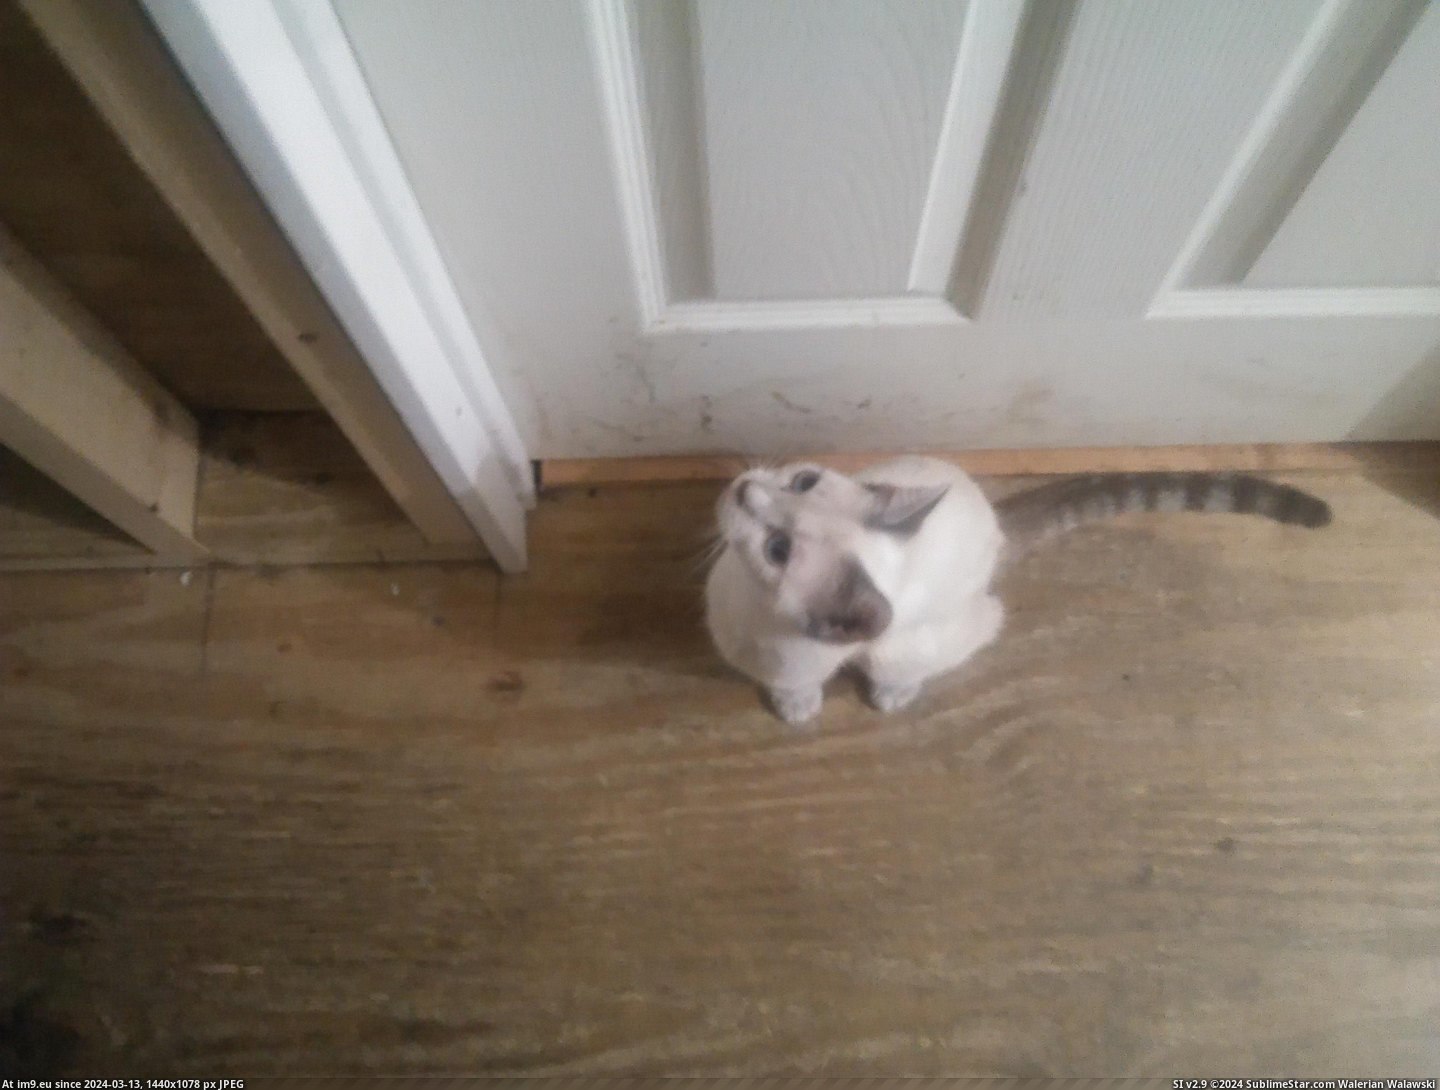 #Cats #Likes #Door #Stretching #Meowing #Sitting #Bedroom #Snowy [Cats] Snowy likes sitting outside of my bedroom door, meowing and stretching at the door until I open the door 5 Pic. (Obraz z album My r/CATS favs))